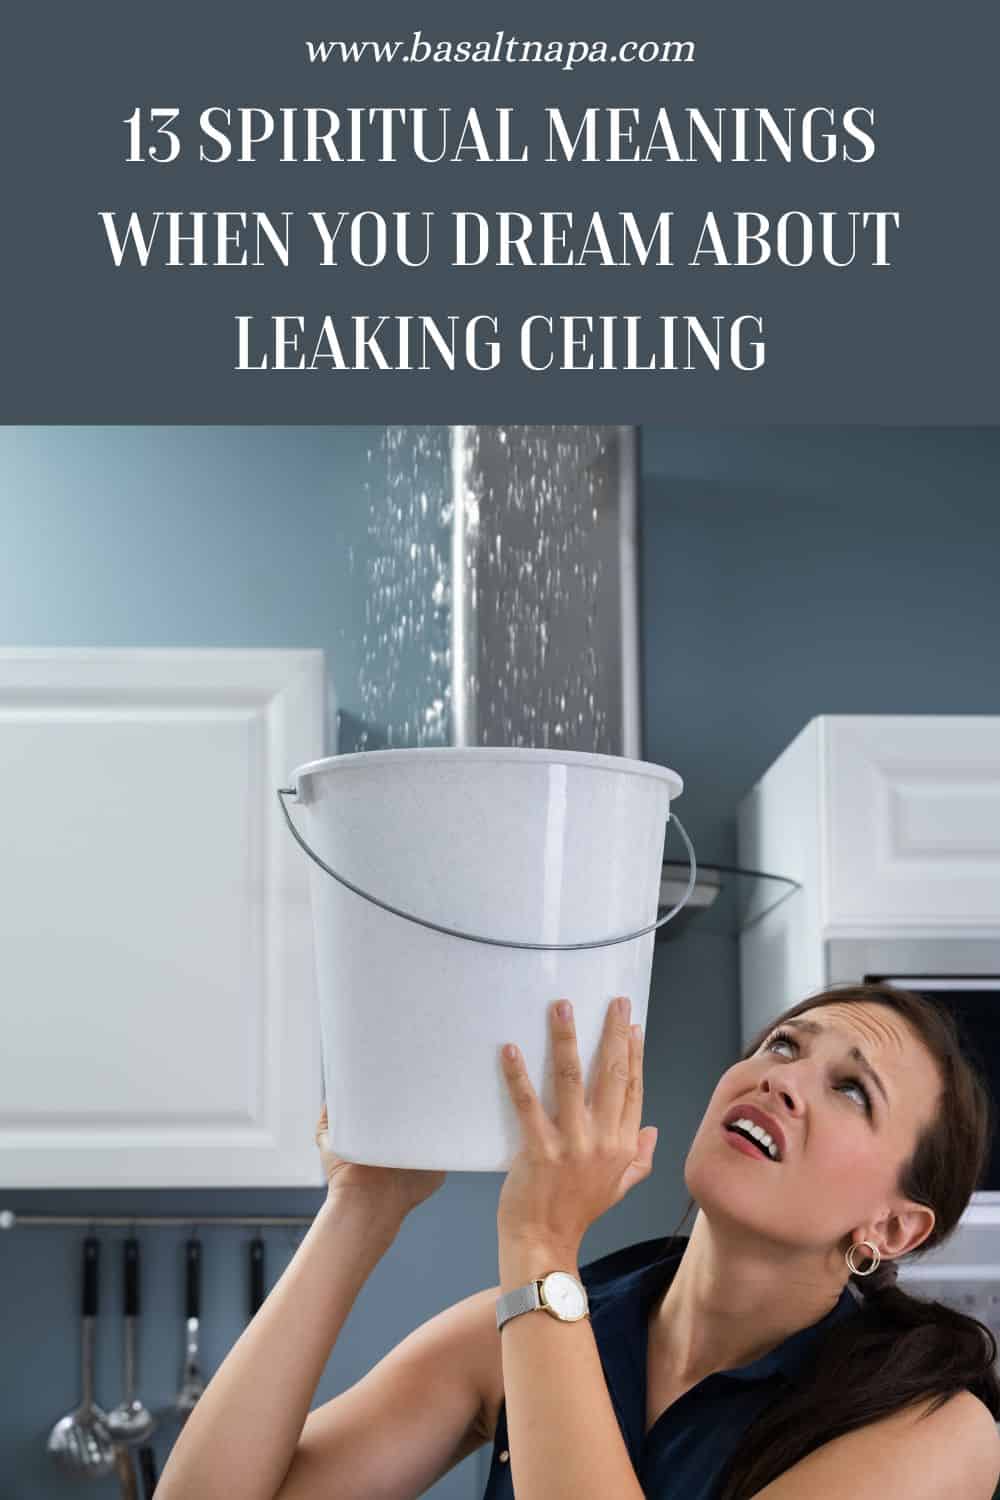 4. Dream Of Water Leaking From Ceiling